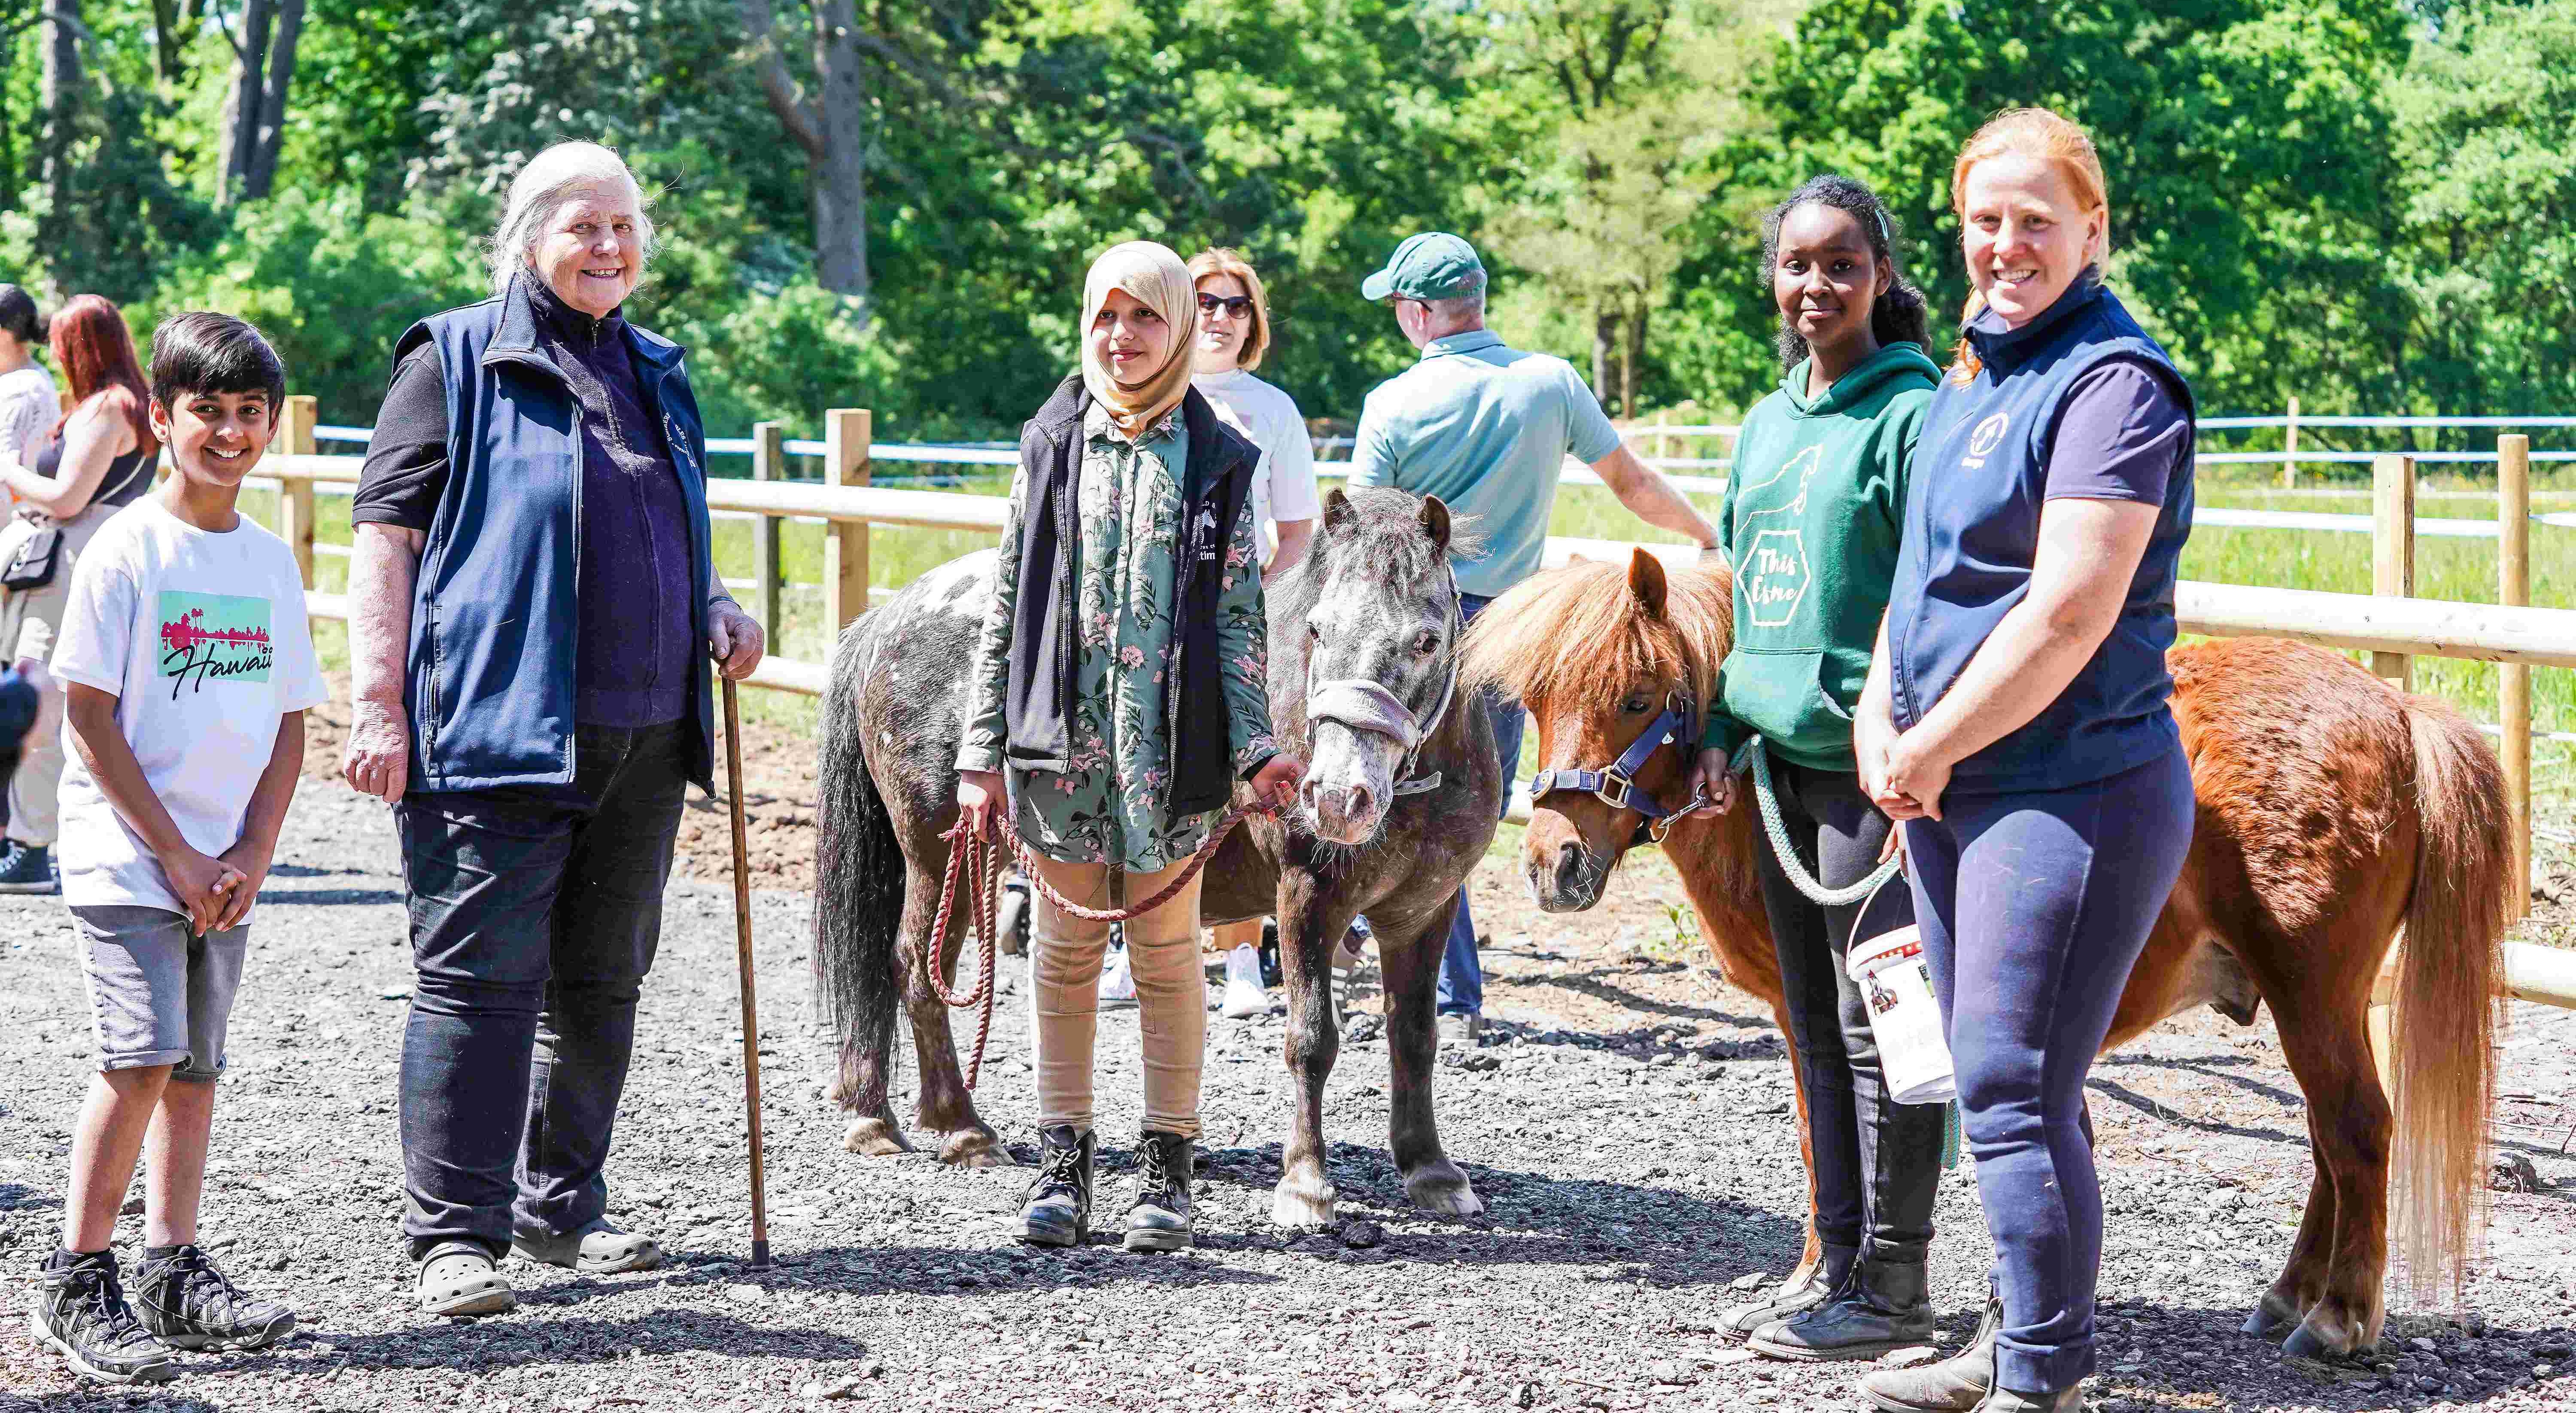 National Inclusion Week: Georgina Urwin from Summerfield Stables gives us her take on Inclusion